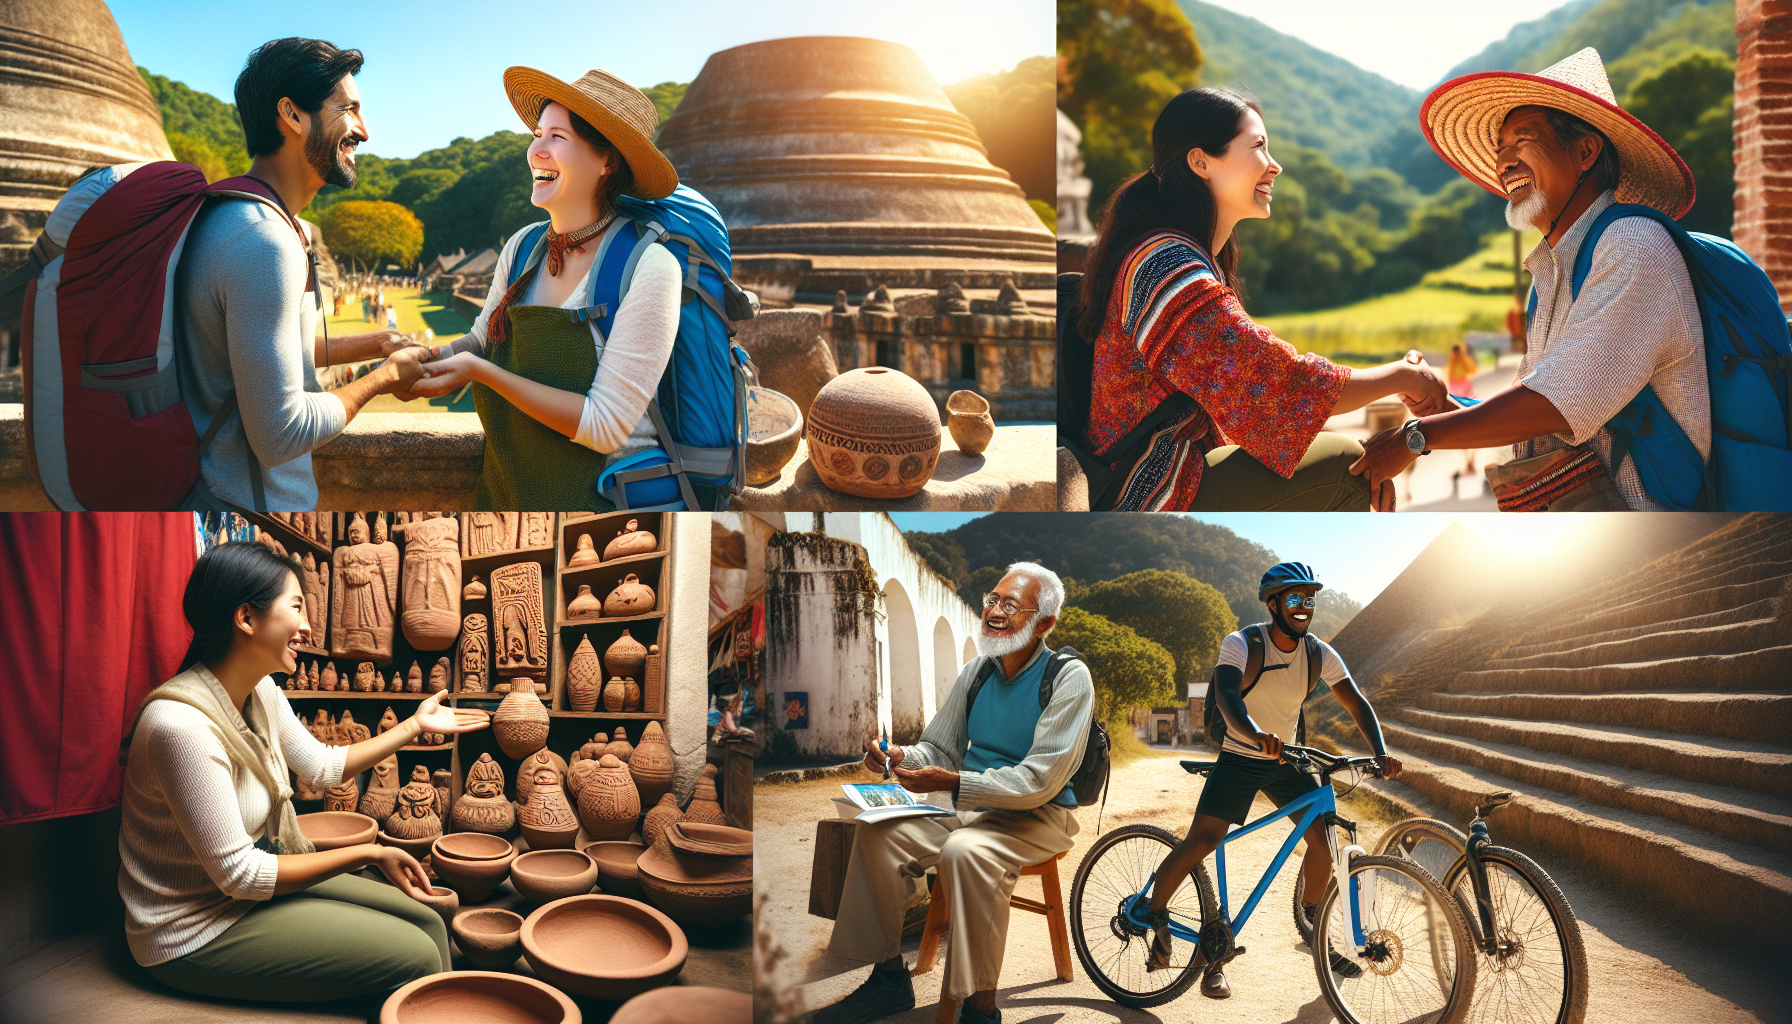 explore local encounters and connections on our travel blog and find the true essence of travel experiences. join us on our journey and discover authentic travel stories.